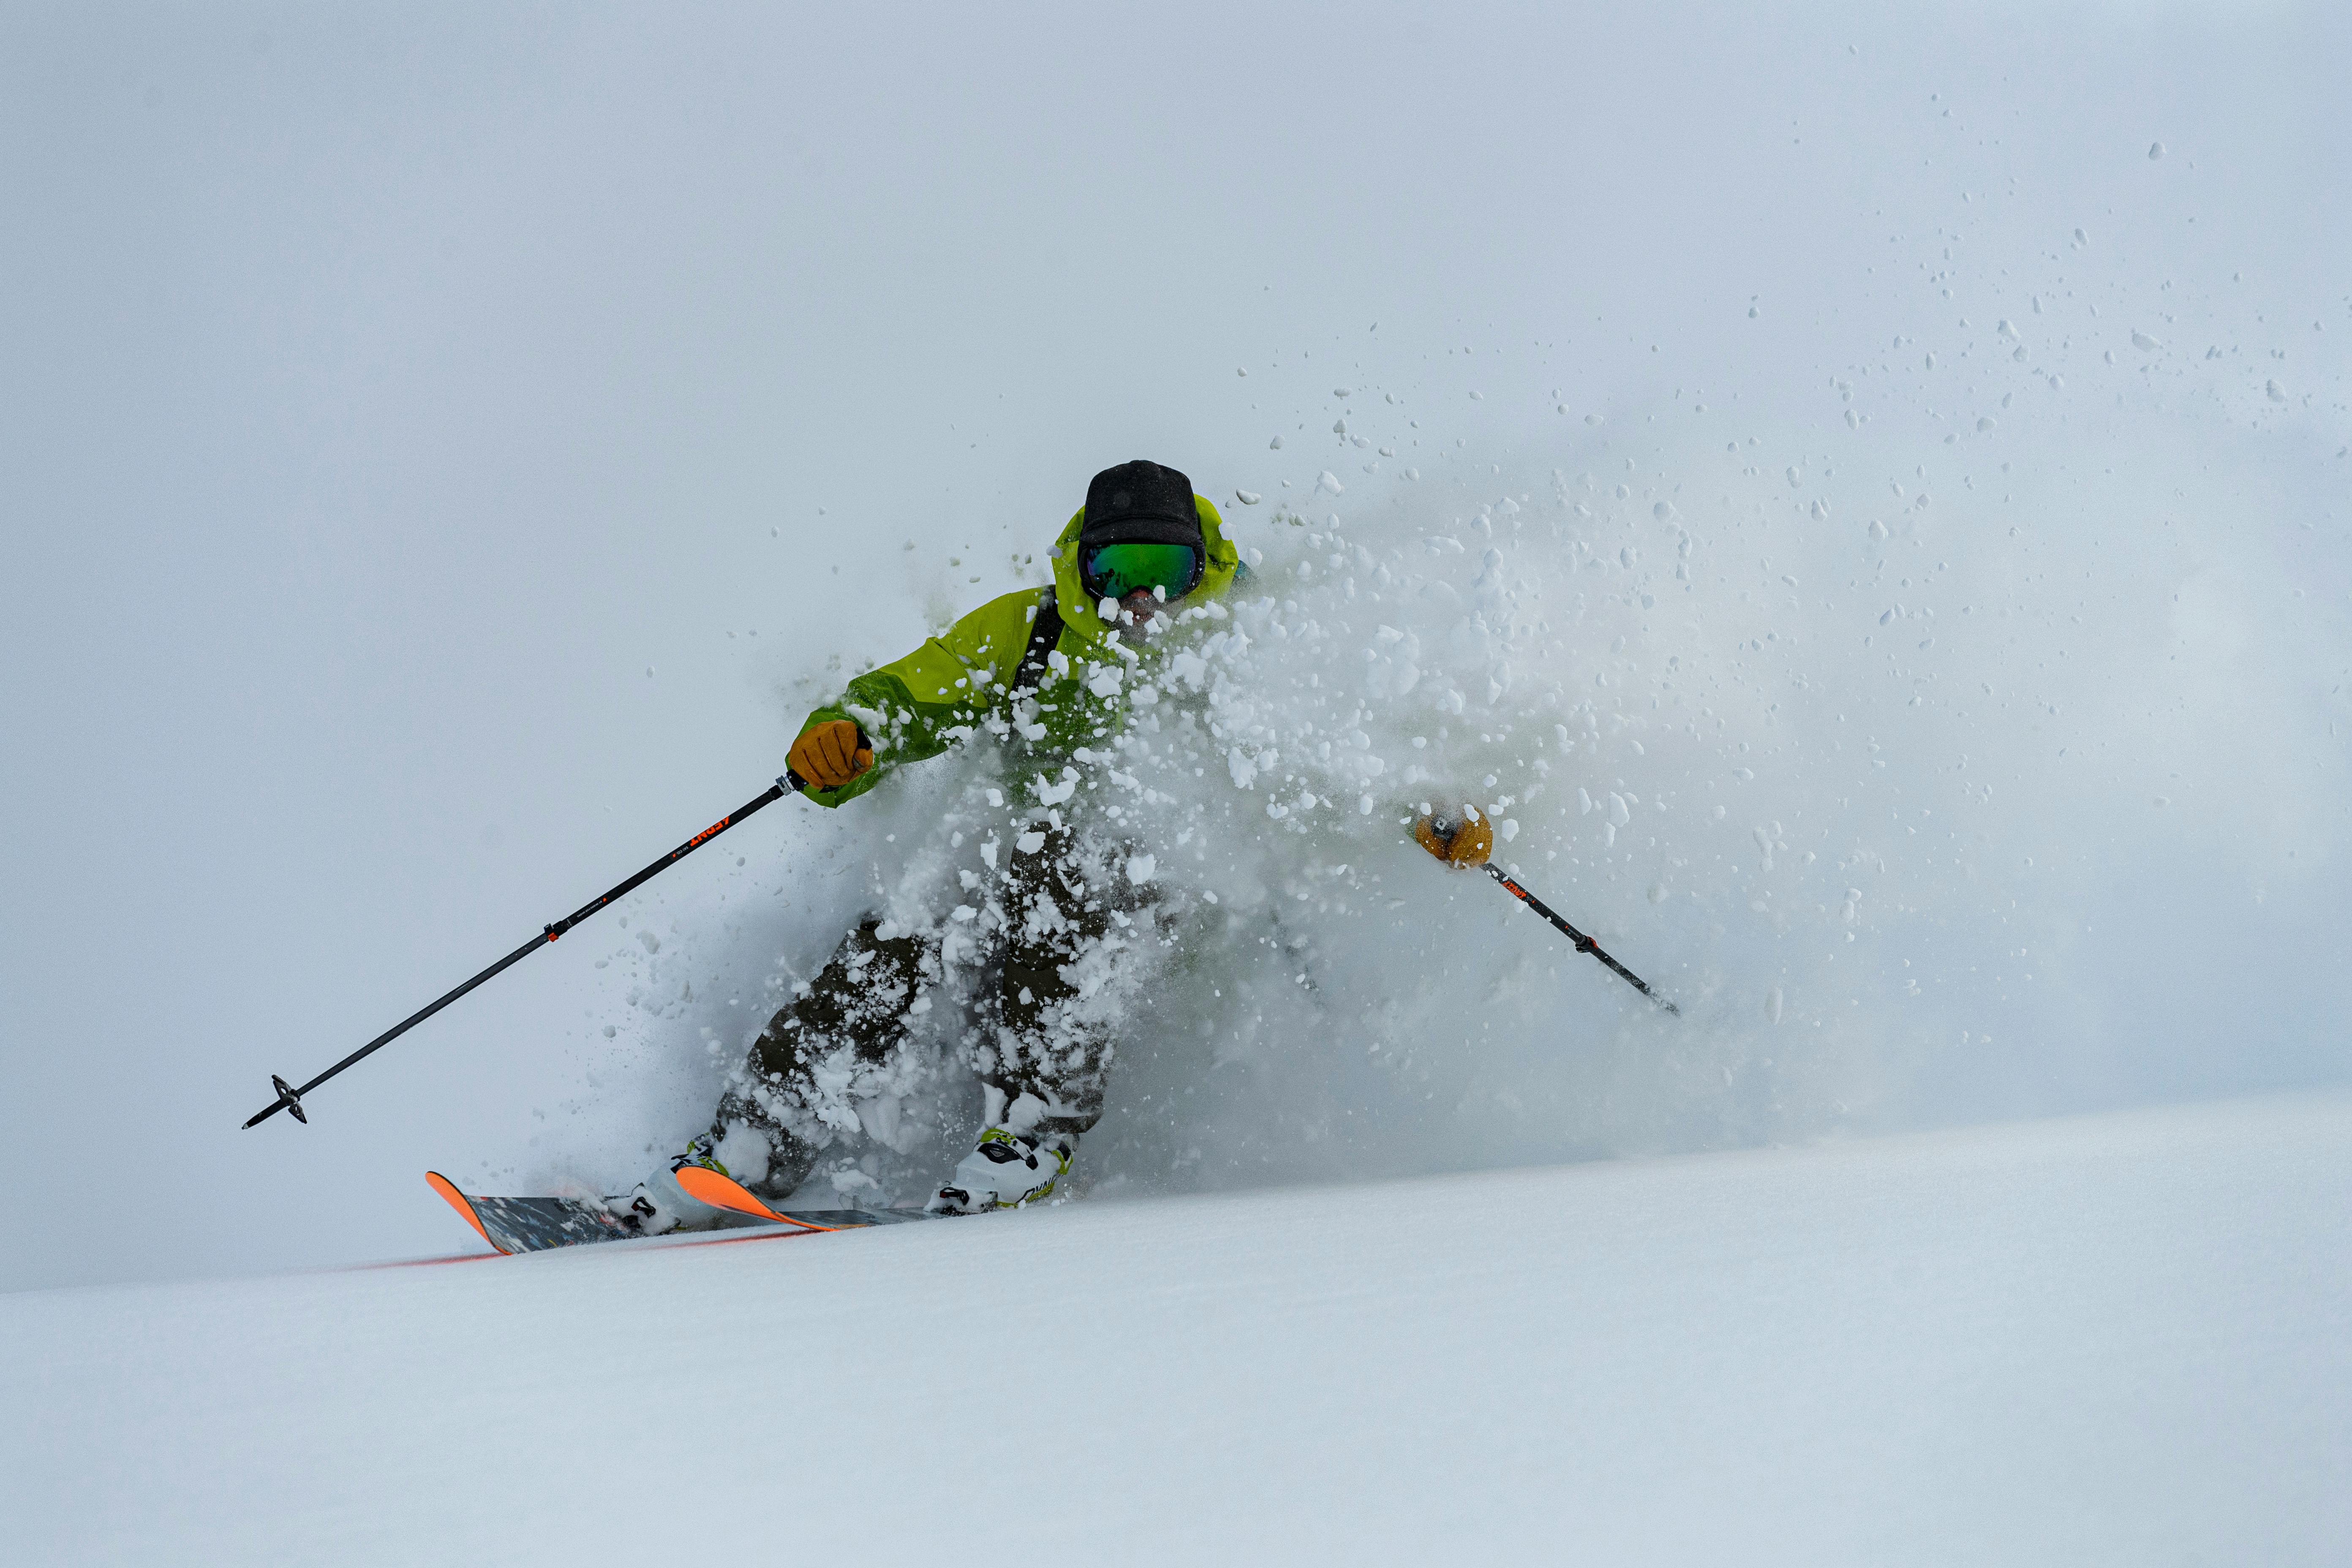 A skier kicking up a wave of powder snow